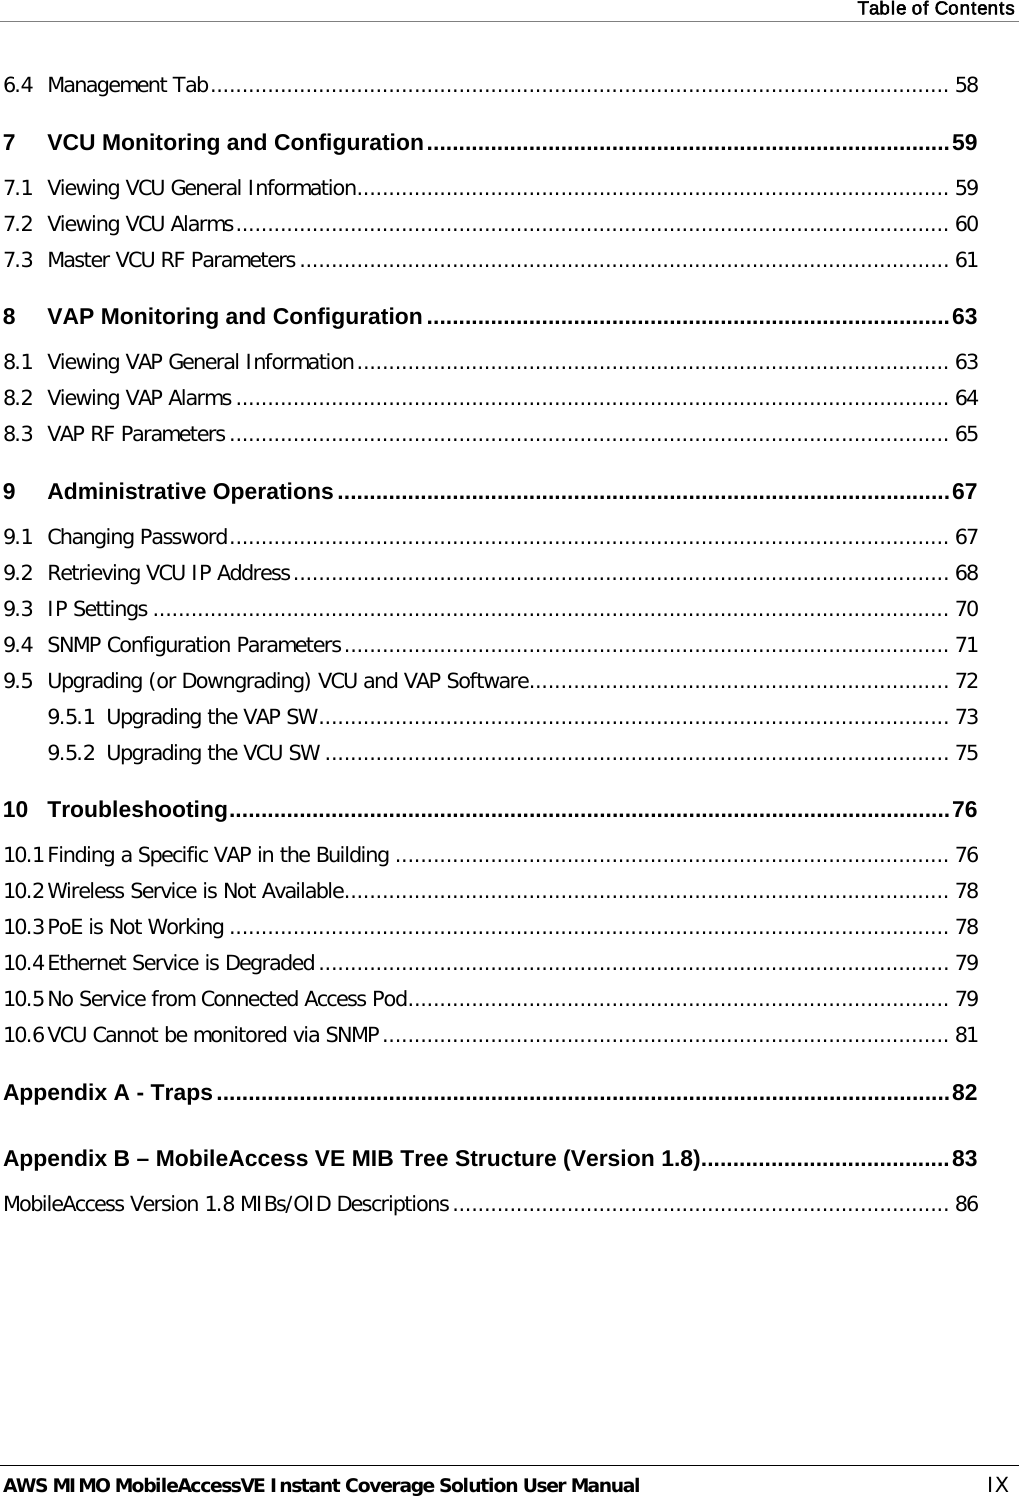 Table of Contents  AWS MIMO MobileAccessVE Instant Coverage Solution User Manual  IX 6.4 Management Tab .................................................................................................................... 58 7 VCU Monitoring and Configuration .................................................................................. 59 7.1 Viewing VCU General Information ............................................................................................. 59 7.2 Viewing VCU Alarms ................................................................................................................ 60 7.3 Master VCU RF Parameters ...................................................................................................... 61 8 VAP Monitoring and Configuration .................................................................................. 63 8.1 Viewing VAP General Information ............................................................................................. 63 8.2 Viewing VAP Alarms ................................................................................................................ 64 8.3 VAP RF Parameters ................................................................................................................. 65 9 Administrative Operations ................................................................................................ 67 9.1 Changing Password ................................................................................................................. 67 9.2 Retrieving VCU IP Address ....................................................................................................... 68 9.3 IP Settings ............................................................................................................................. 70 9.4 SNMP Configuration Parameters ............................................................................................... 71 9.5 Upgrading (or Downgrading) VCU and VAP Software .................................................................. 72 9.5.1 Upgrading the VAP SW ................................................................................................... 73 9.5.2 Upgrading the VCU SW .................................................................................................. 75 10 Troubleshooting ................................................................................................................. 76 10.1 Finding a Specific VAP in the Building ....................................................................................... 76 10.2 Wireless Service is Not Available ............................................................................................... 78 10.3 PoE is Not Working ................................................................................................................. 78 10.4 Ethernet Service is Degraded ................................................................................................... 79 10.5 No Service from Connected Access Pod ..................................................................................... 79 10.6 VCU Cannot be monitored via SNMP ......................................................................................... 81 Appendix A - Traps ................................................................................................................... 82 Appendix B – MobileAccess VE MIB Tree Structure (Version 1.8)....................................... 83 MobileAccess Version 1.8 MIBs/OID Descriptions .............................................................................. 86 